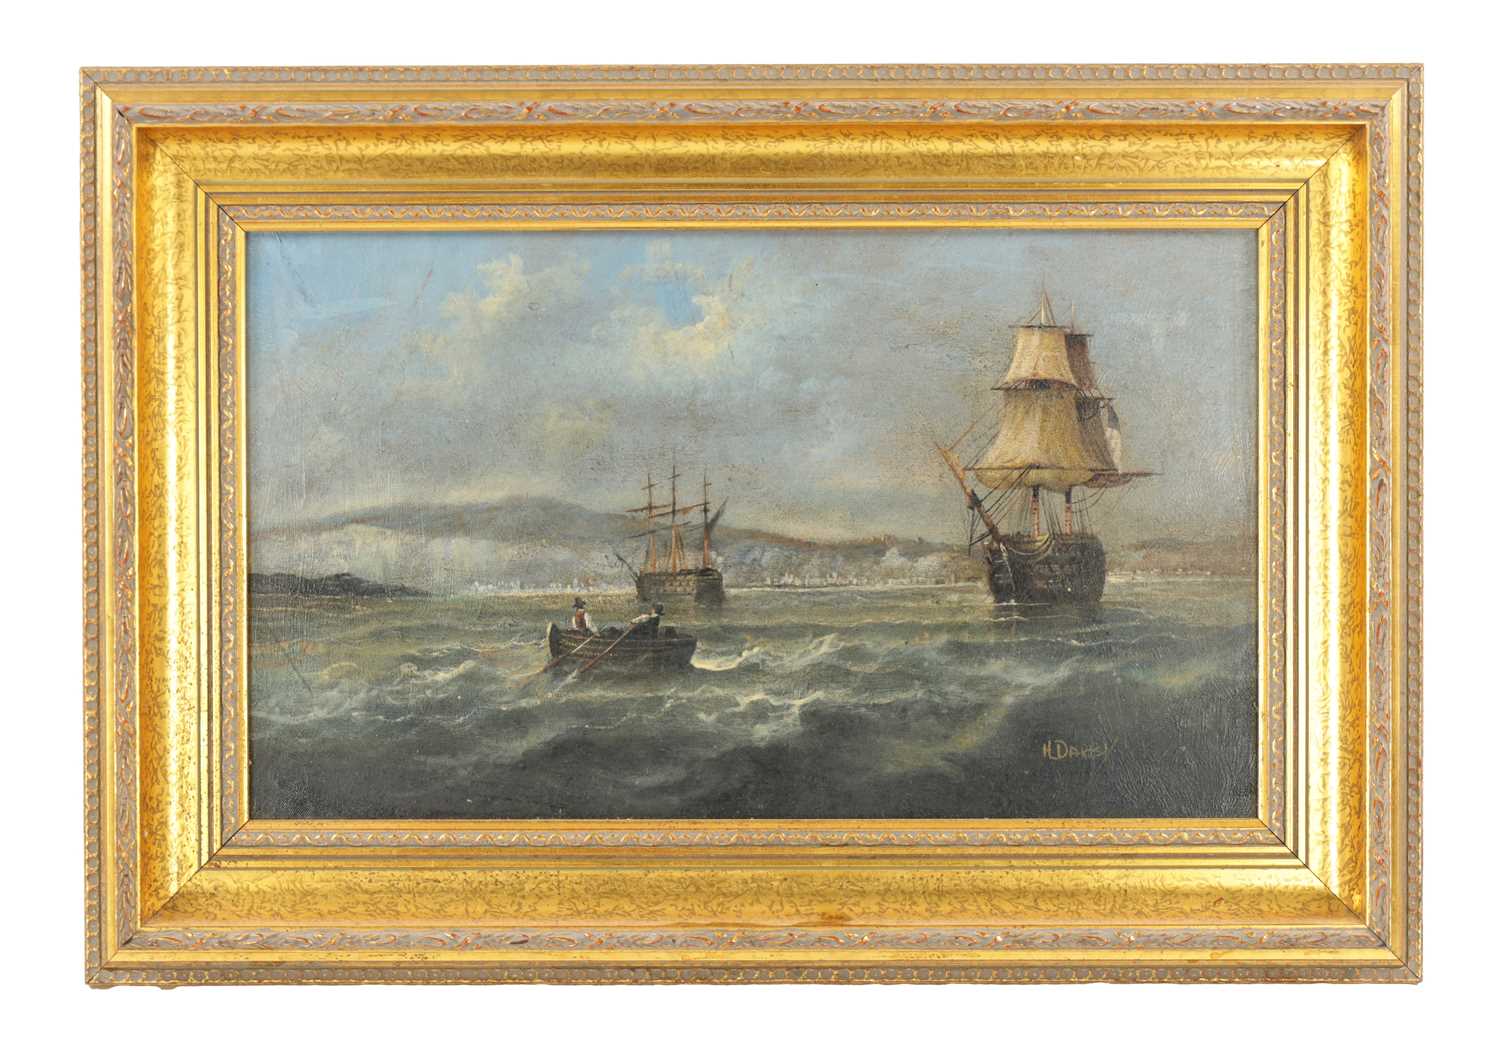 H. DARBY. 20TH CENTURY OIL ON BOARD